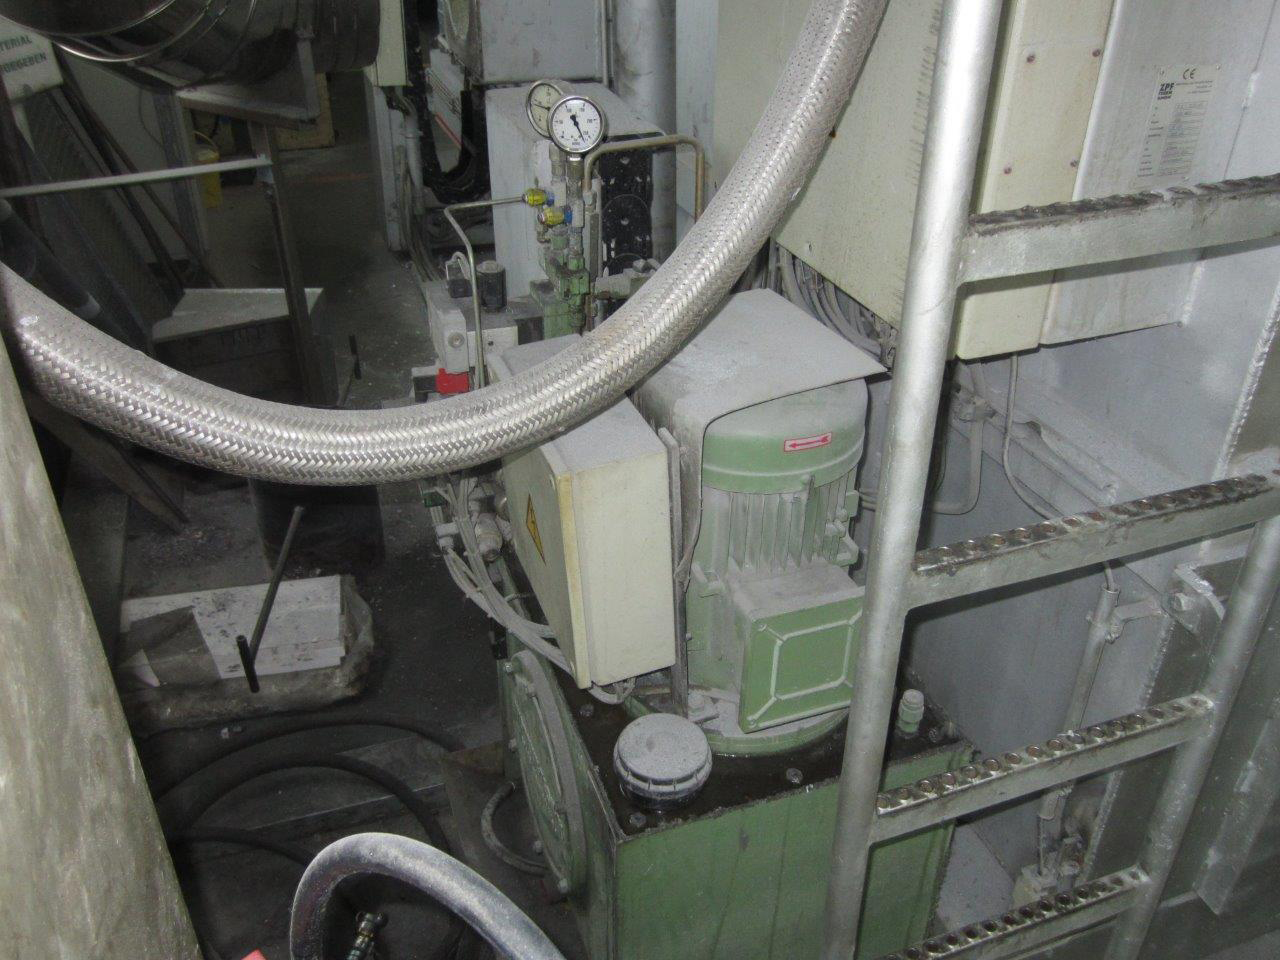 ZPF S-G1 T2,25 HT melting and holding furnace O1666, used